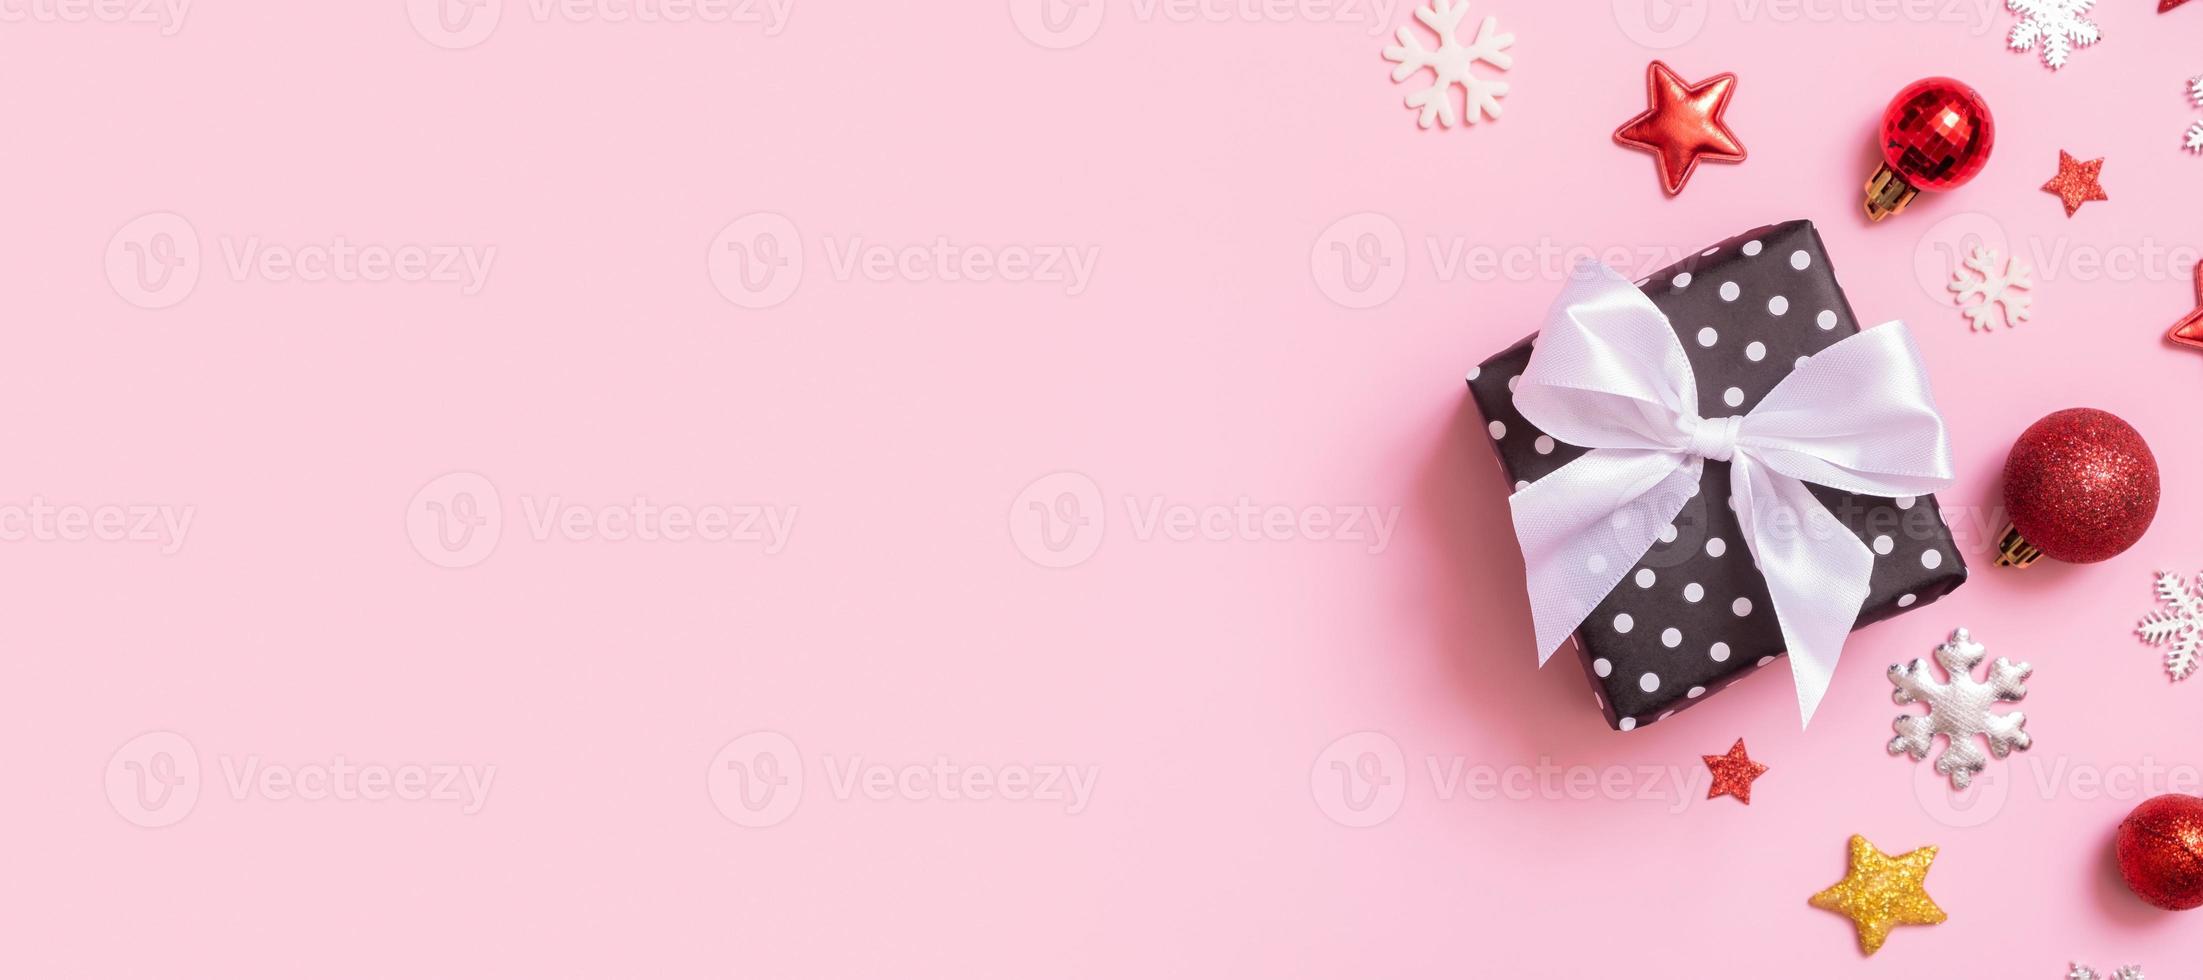 Christmas banner with present flat lay on a pink background. Top view xmas gift box with decorations. photo